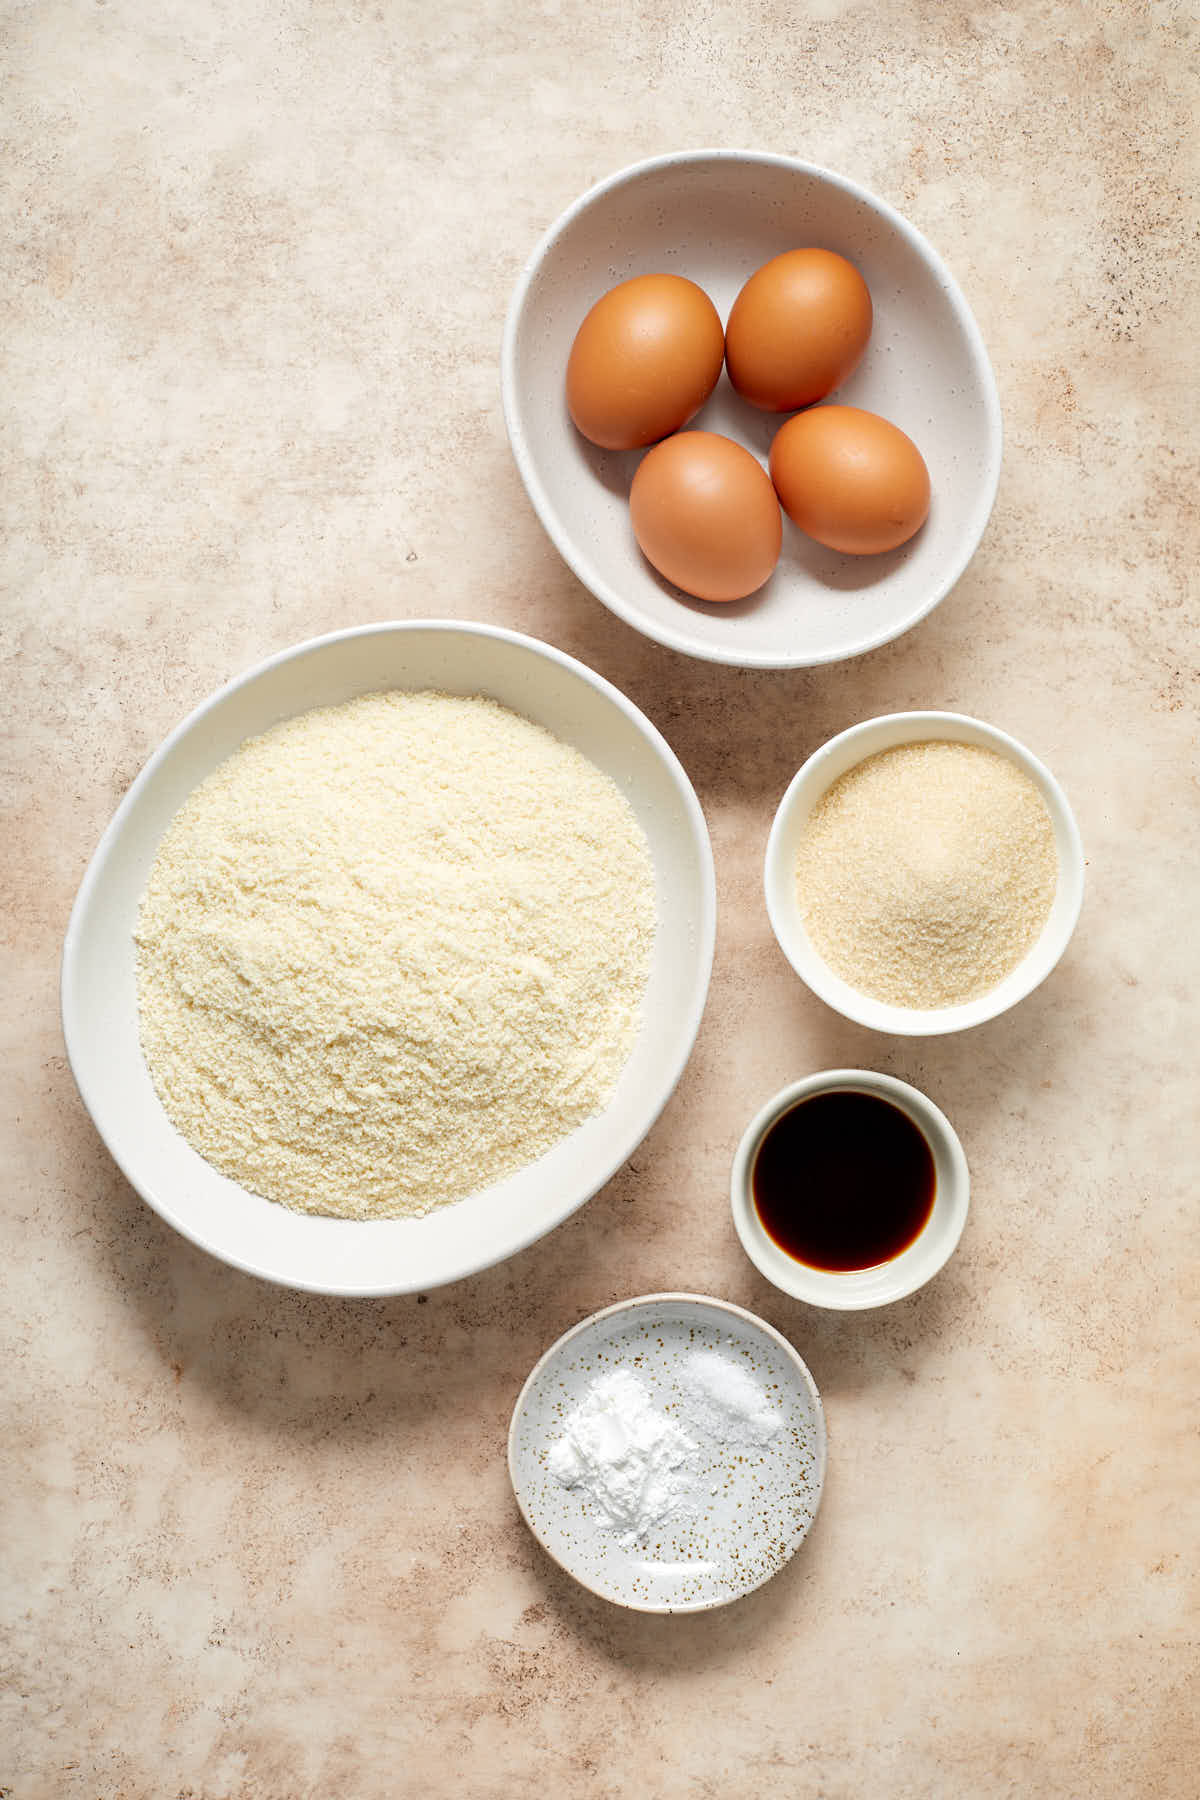 Ingredients to make almond flour cupcakes arranged in individual dishes.